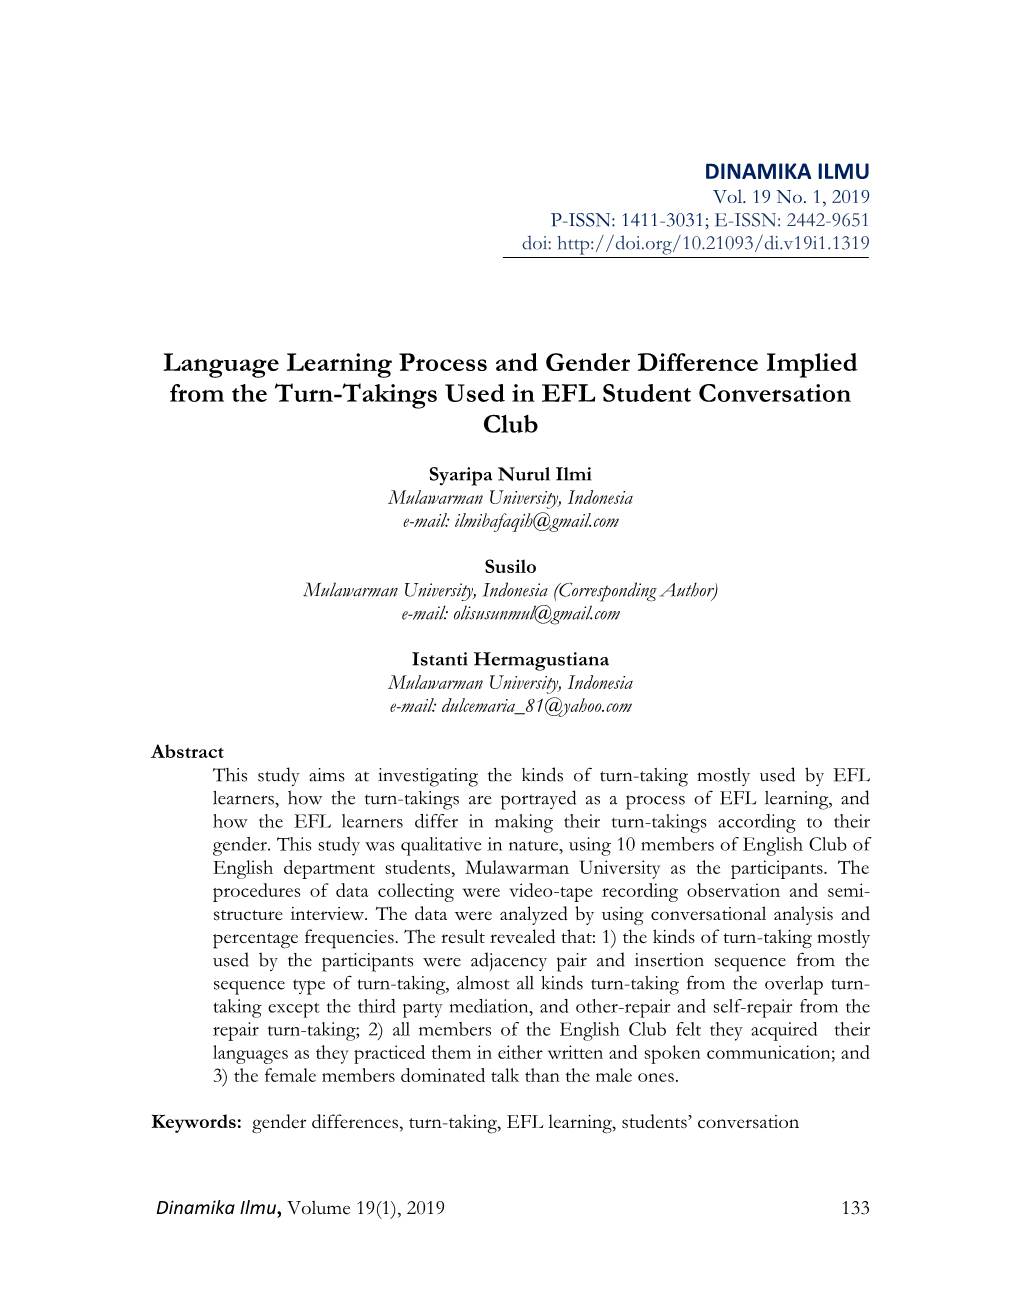 Language Learning Process and Gender Difference Implied from the Turn-Takings Used in EFL Student Conversation Club